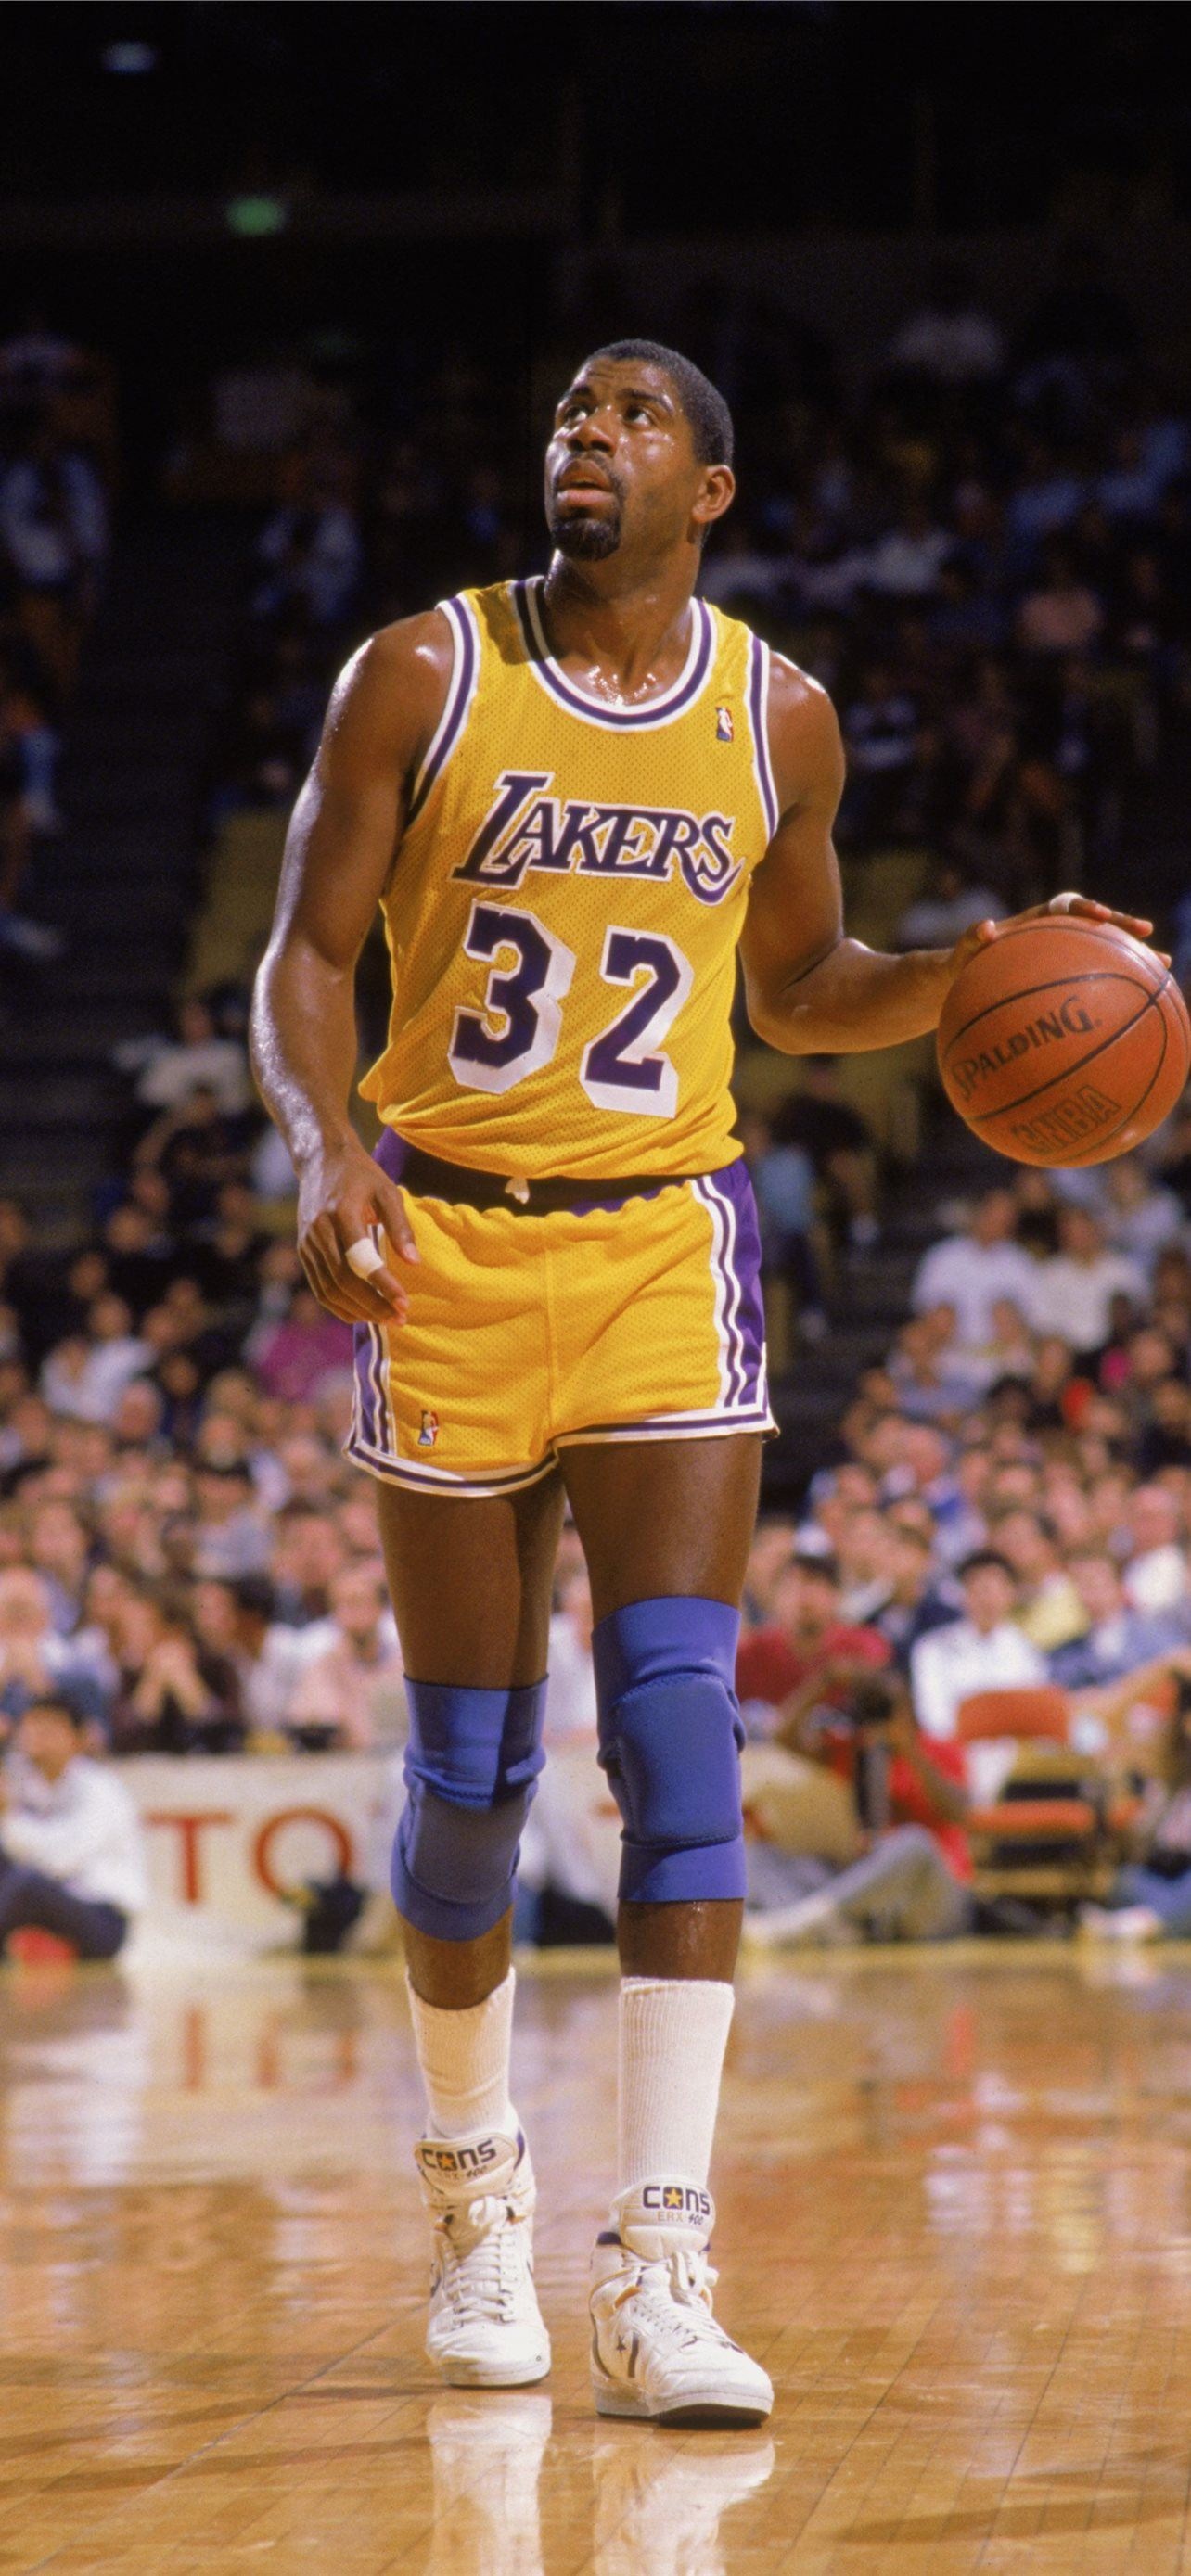 Magic Johnson, Sports, iPhone wallpapers, Free download, 1290x2780 HD Phone